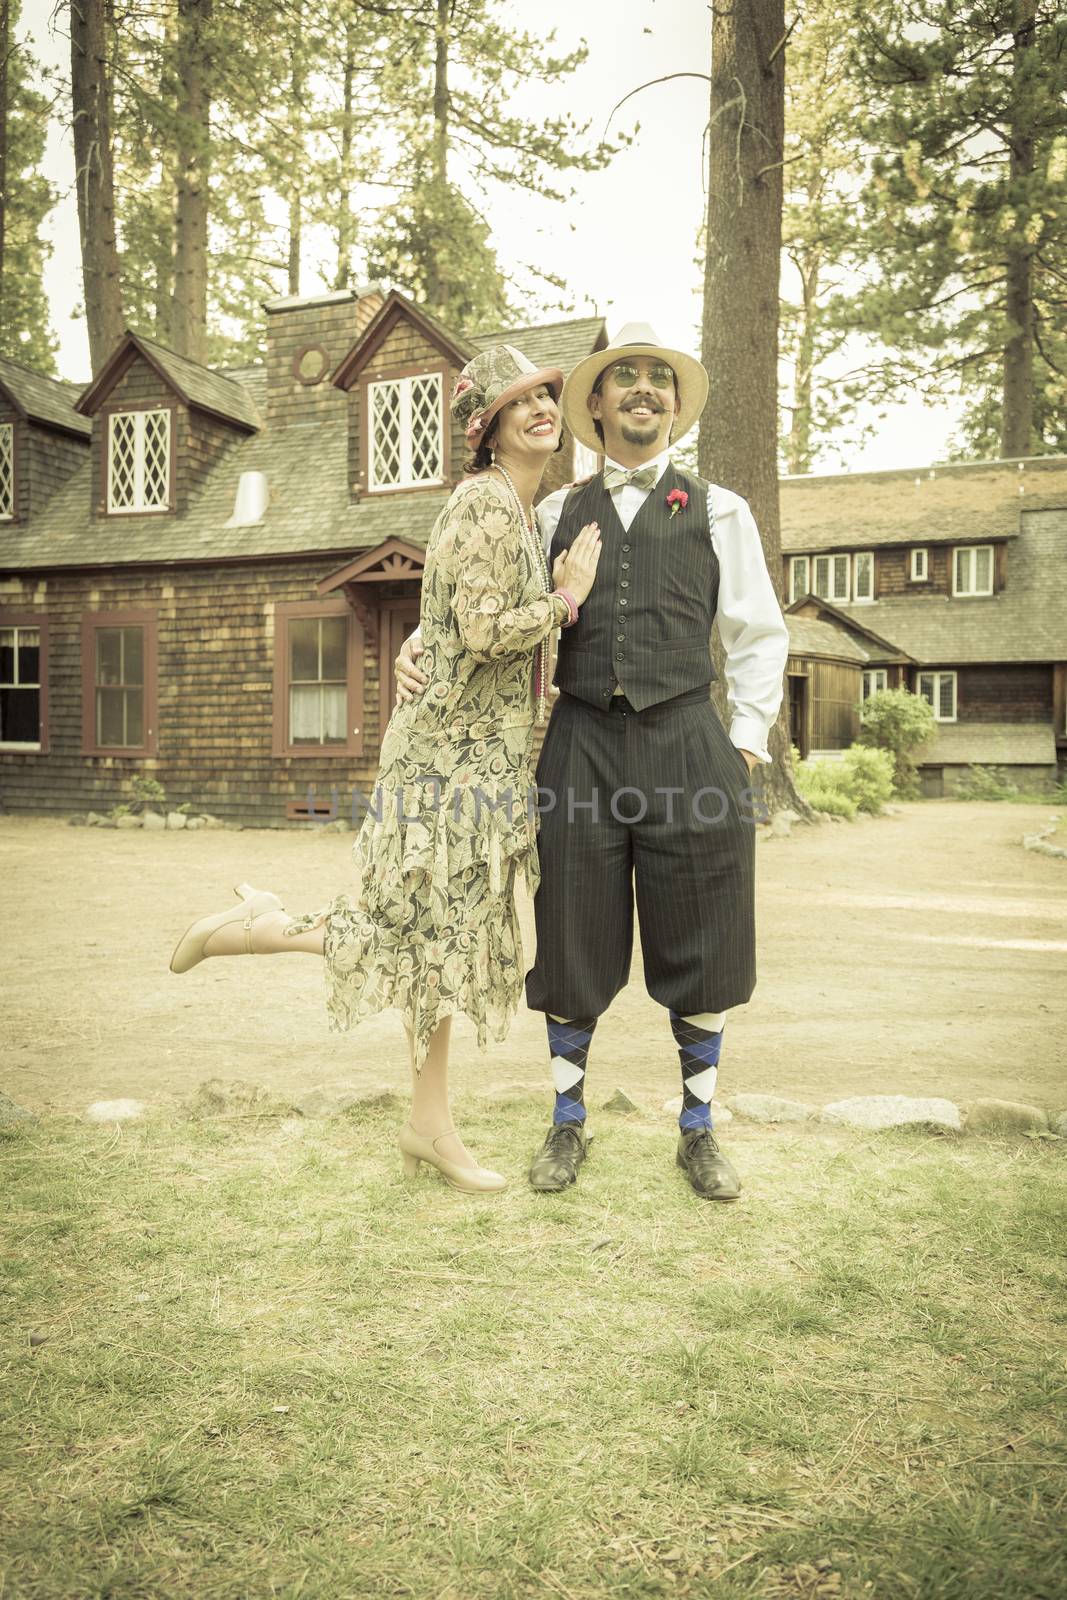 Attractive 1920s Dressed Romantic Couple in Front of Old Cabin Portrait.